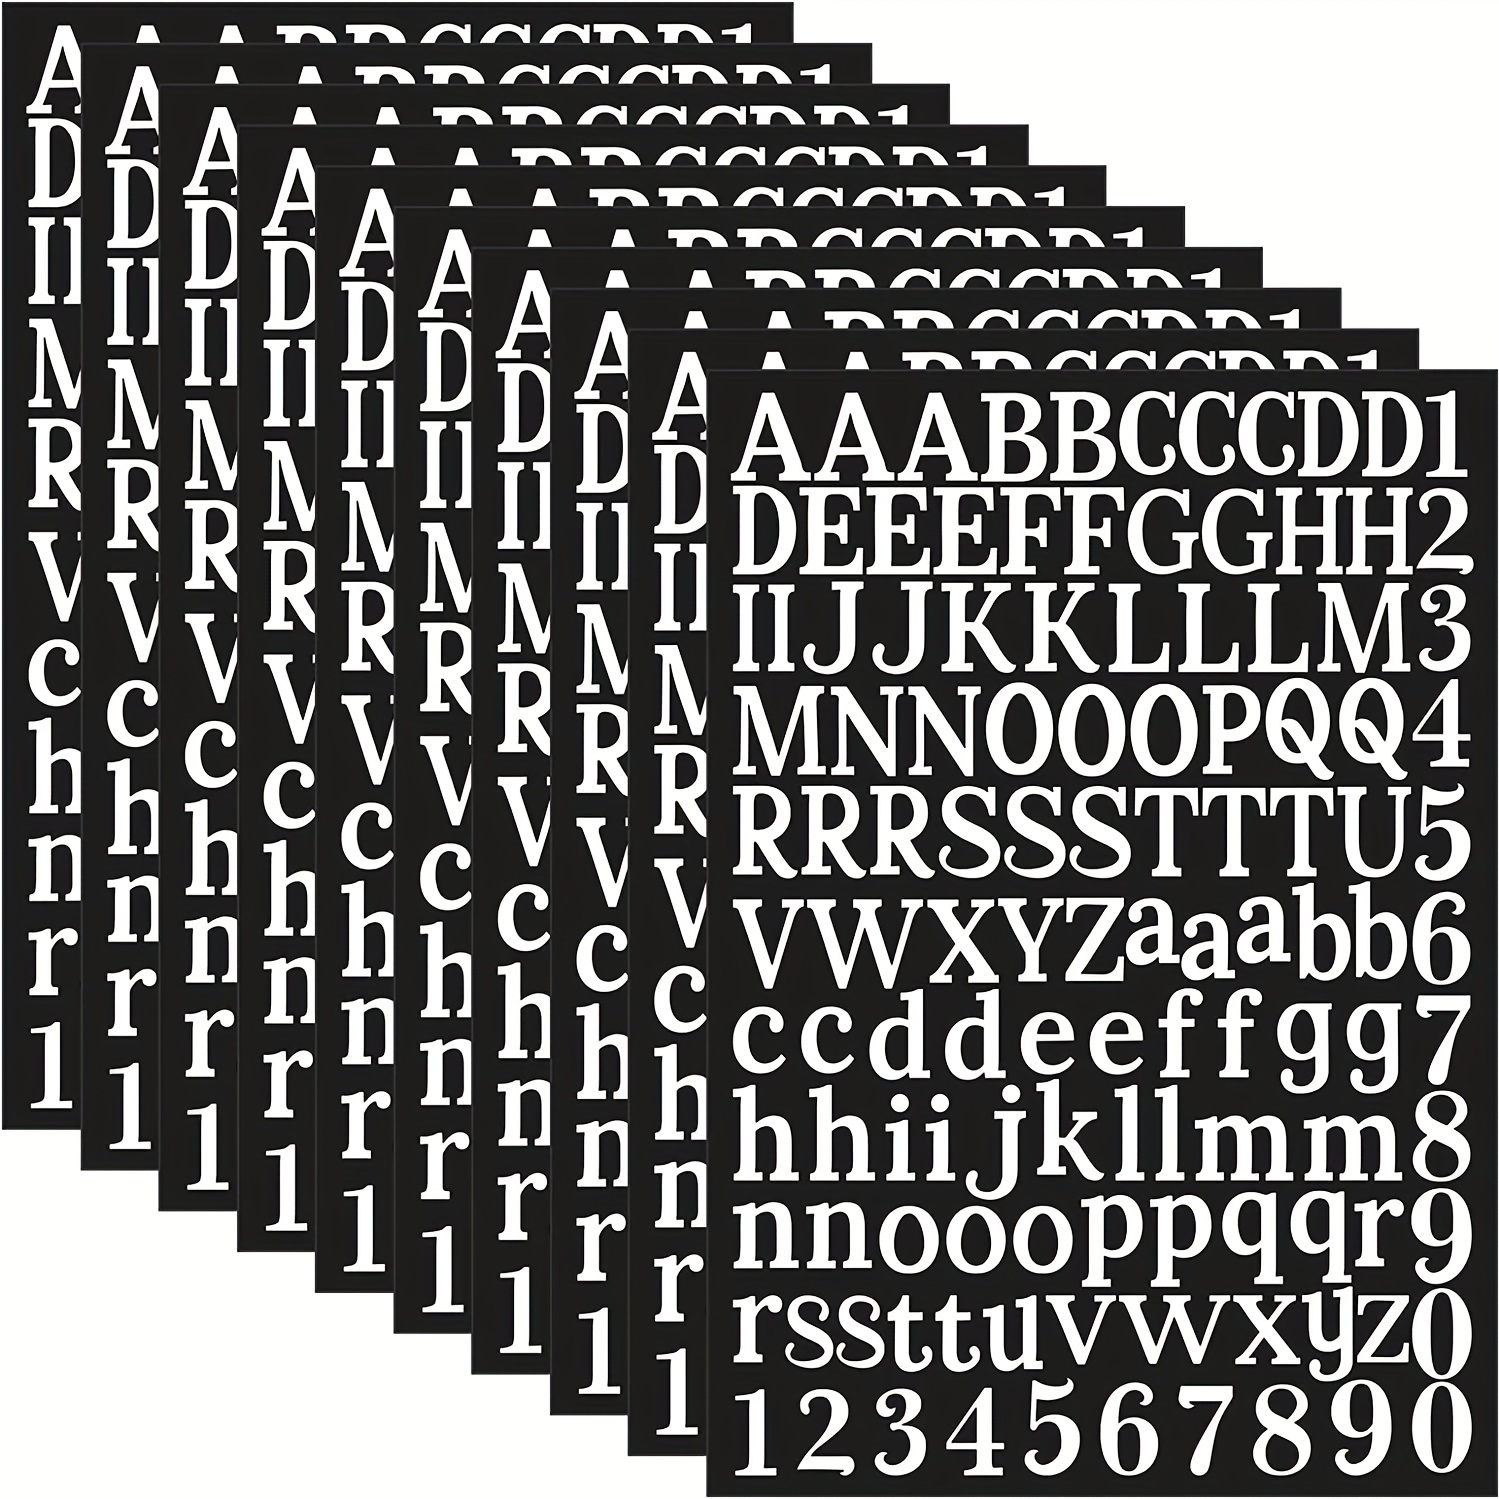 letters stickers self adhesive alphabet numbers decals vinyl lettering